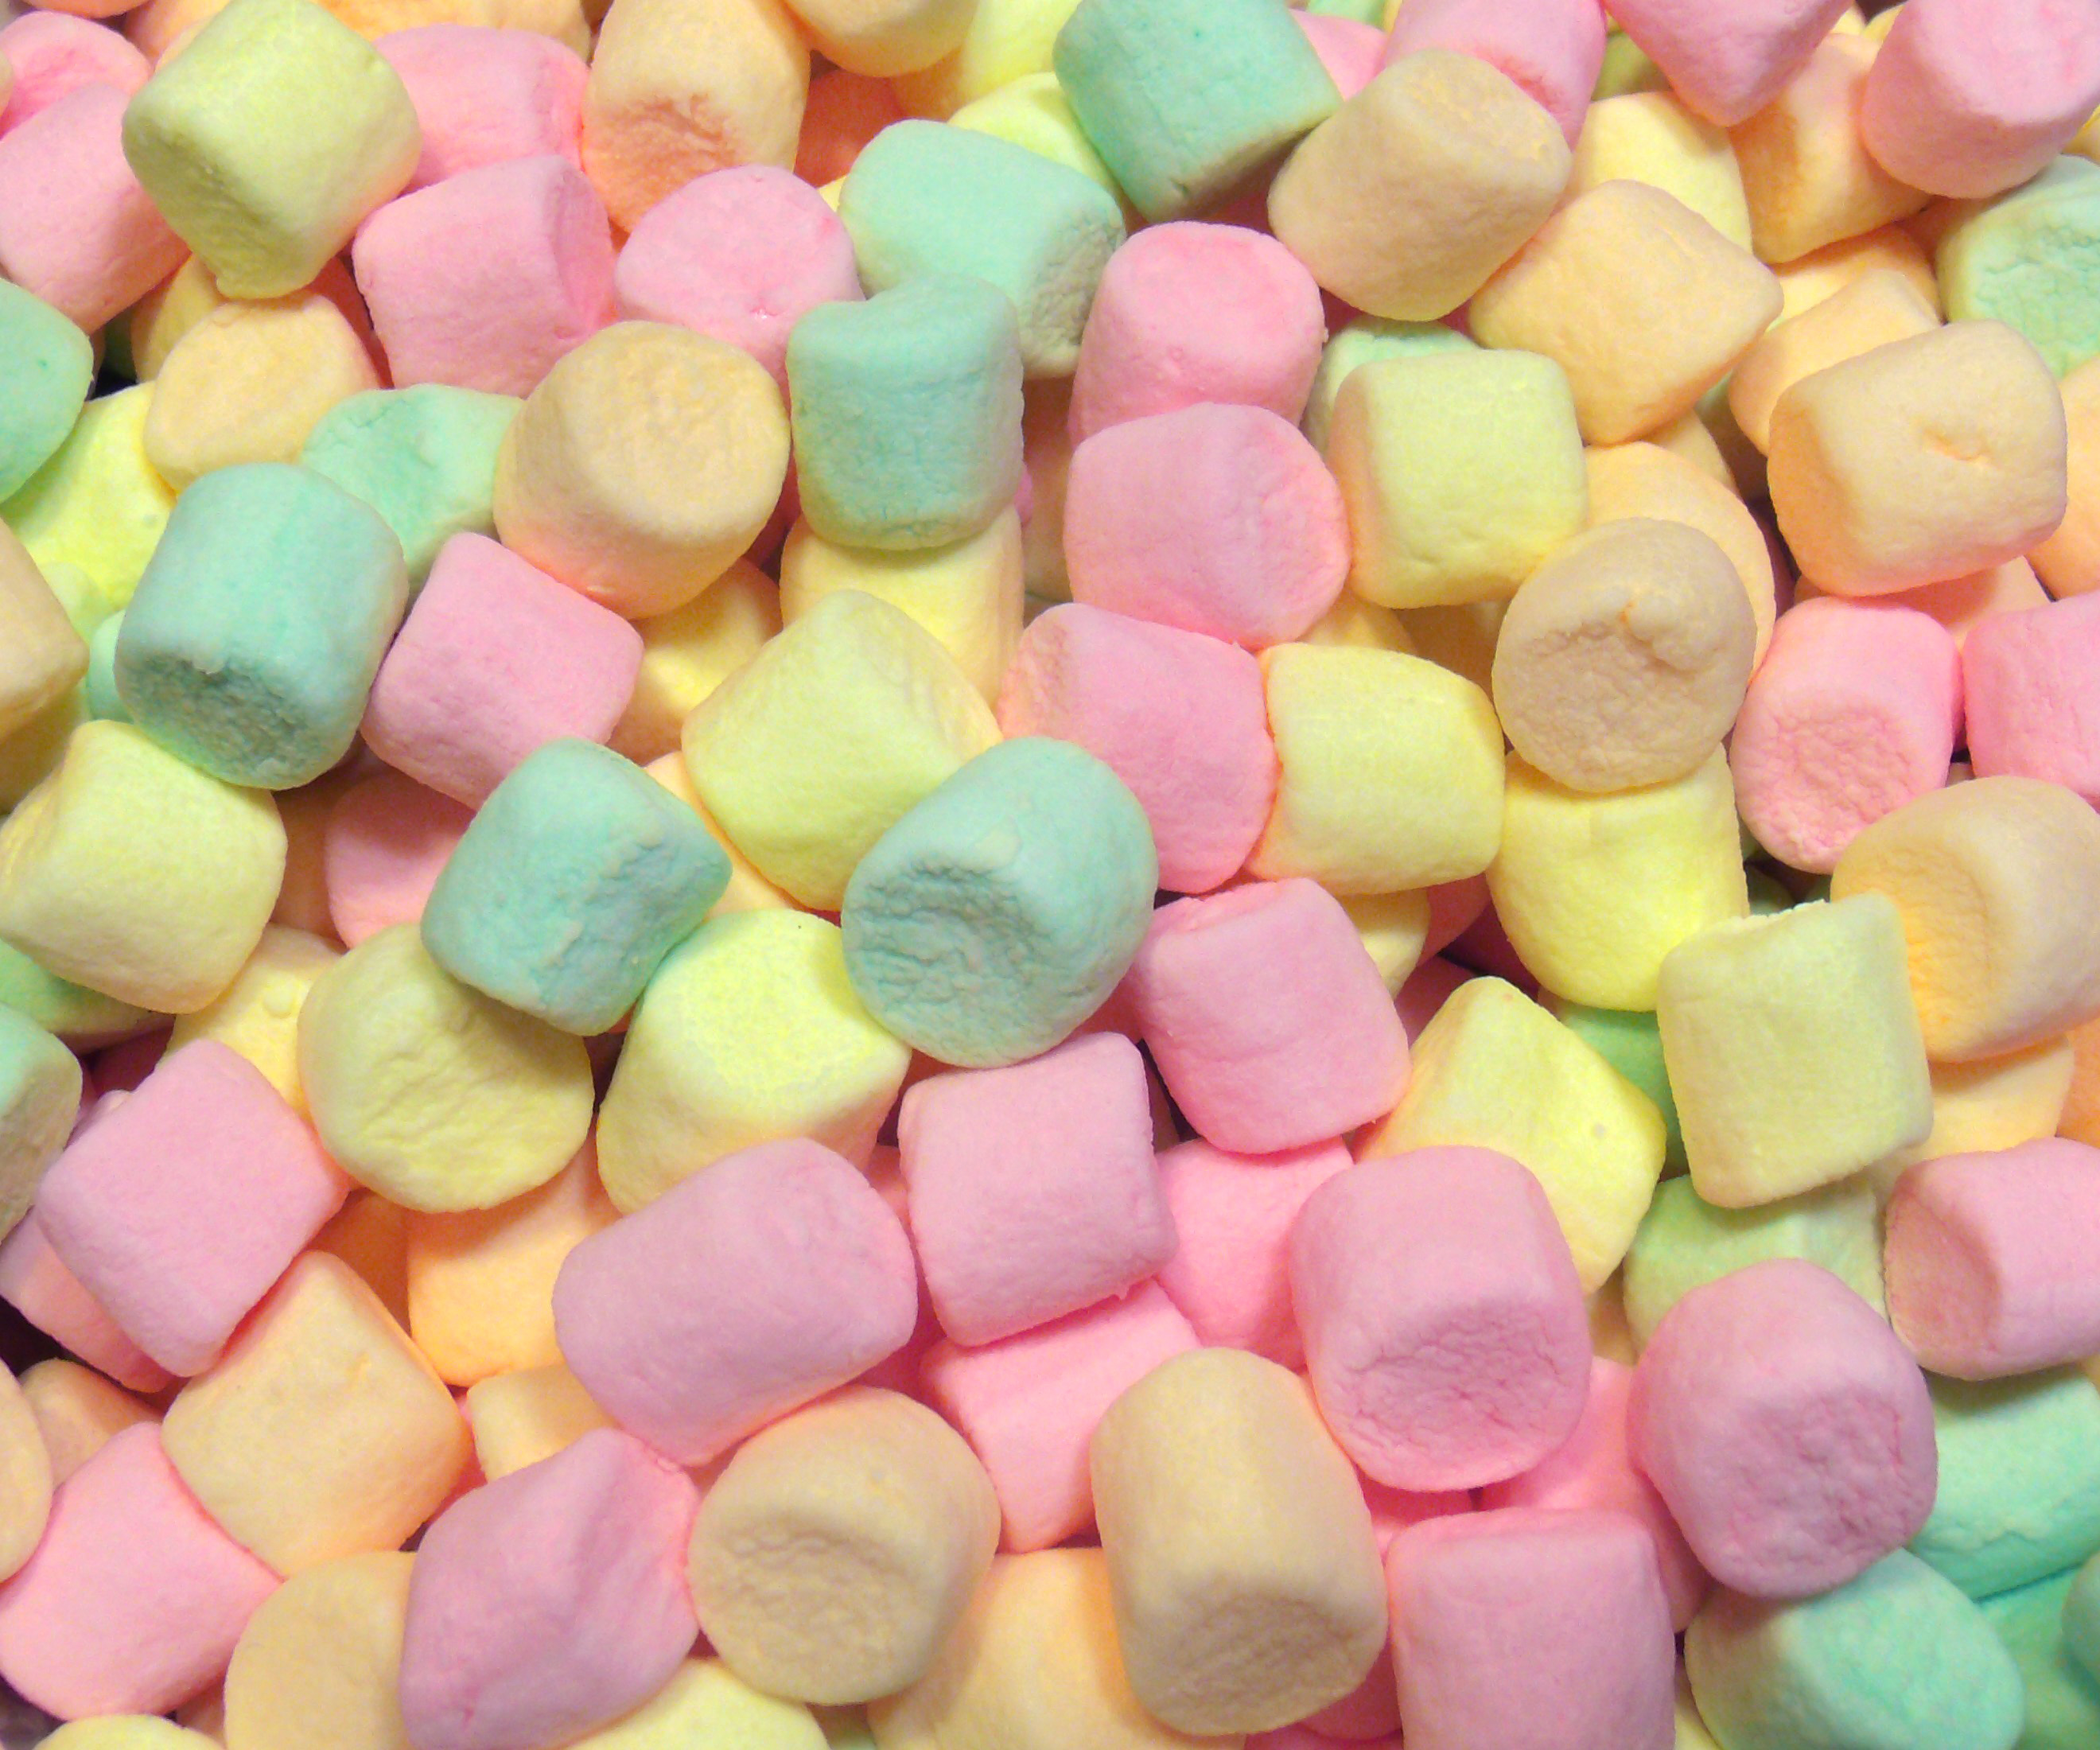 Free photo: Colorful mini marshmallow texture - Candy, Colorful, Food ...